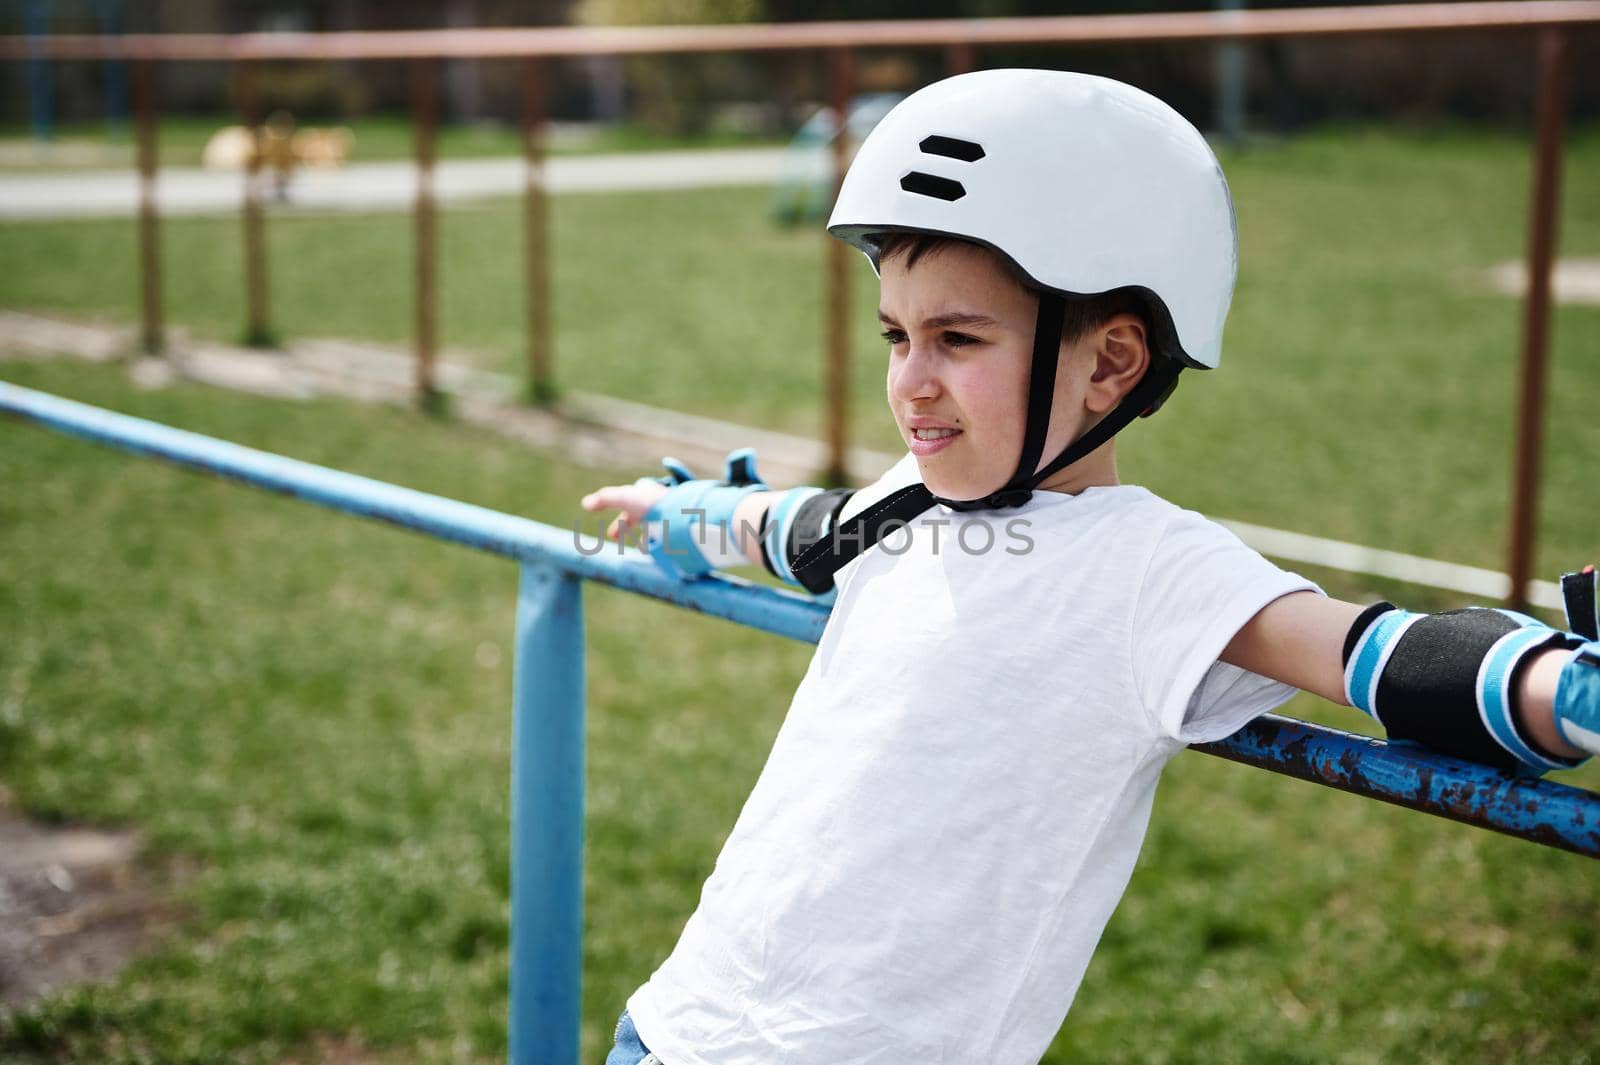 Handsome boy in safety helmet and protective gear leaning against horizontal bar on playground outdoors by artgf